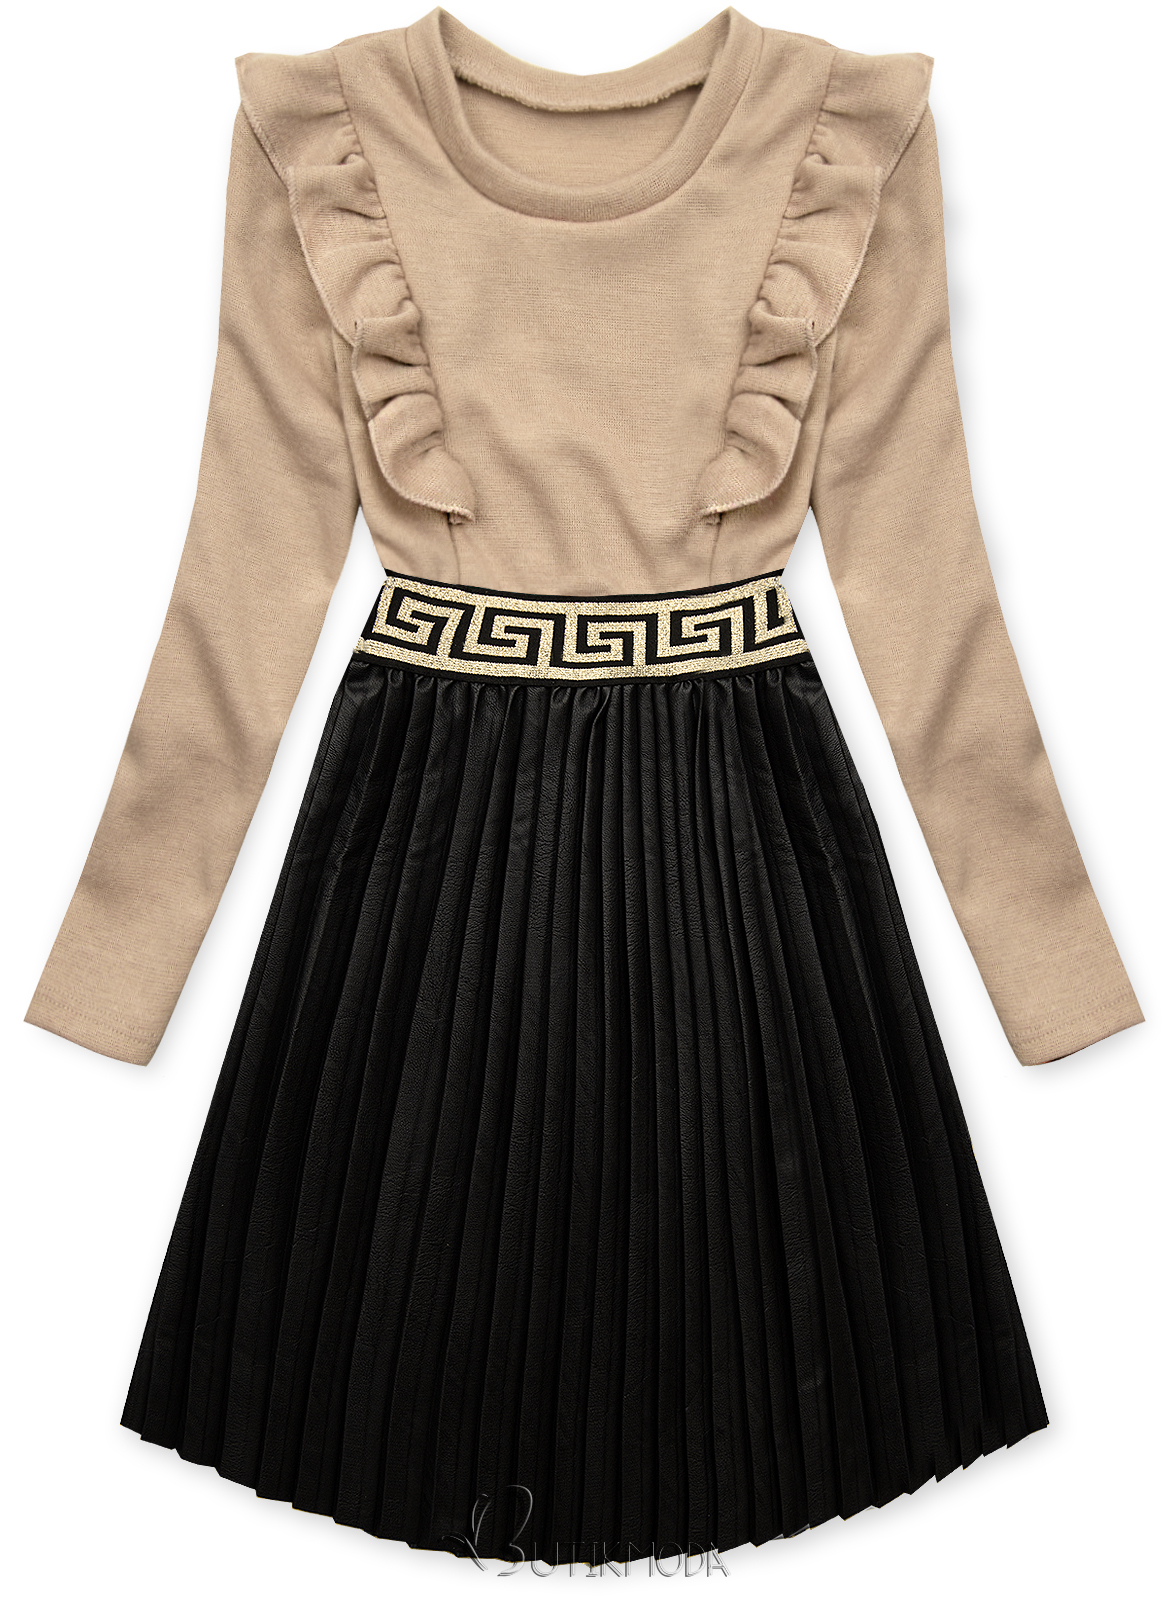 Beige dress with leather pleated skirt